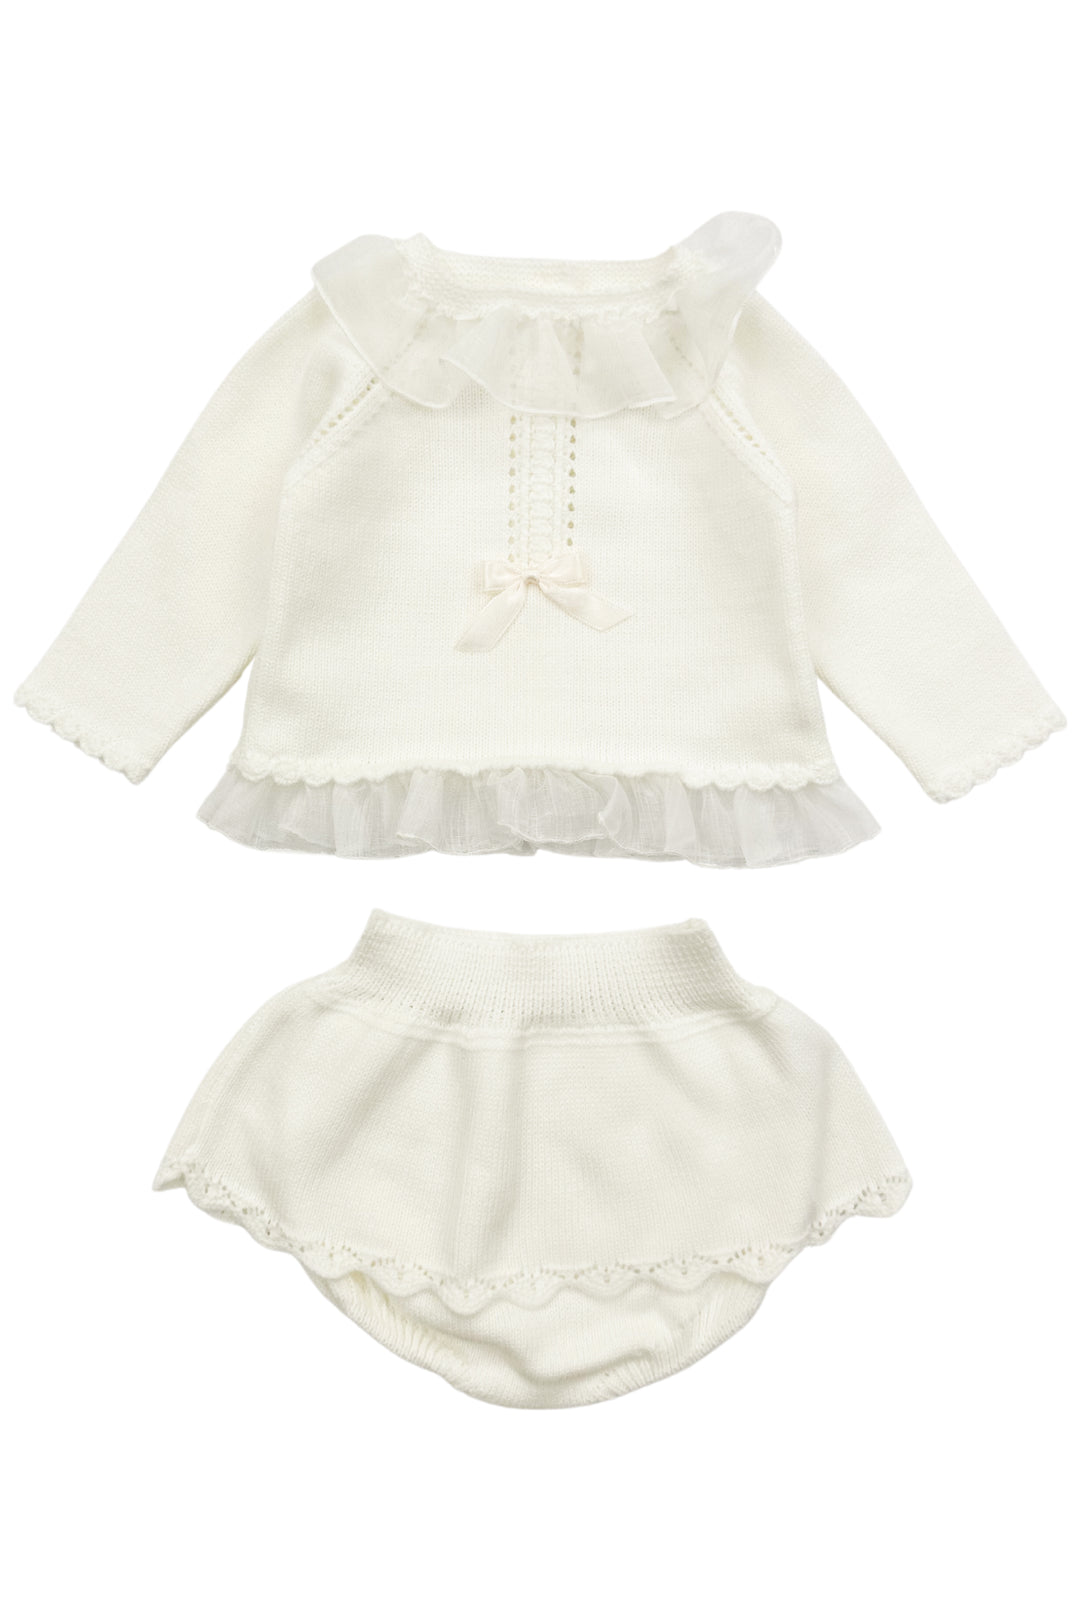 Granlei "Cora" Ivory Knit Top & Bloomers | Millie and John